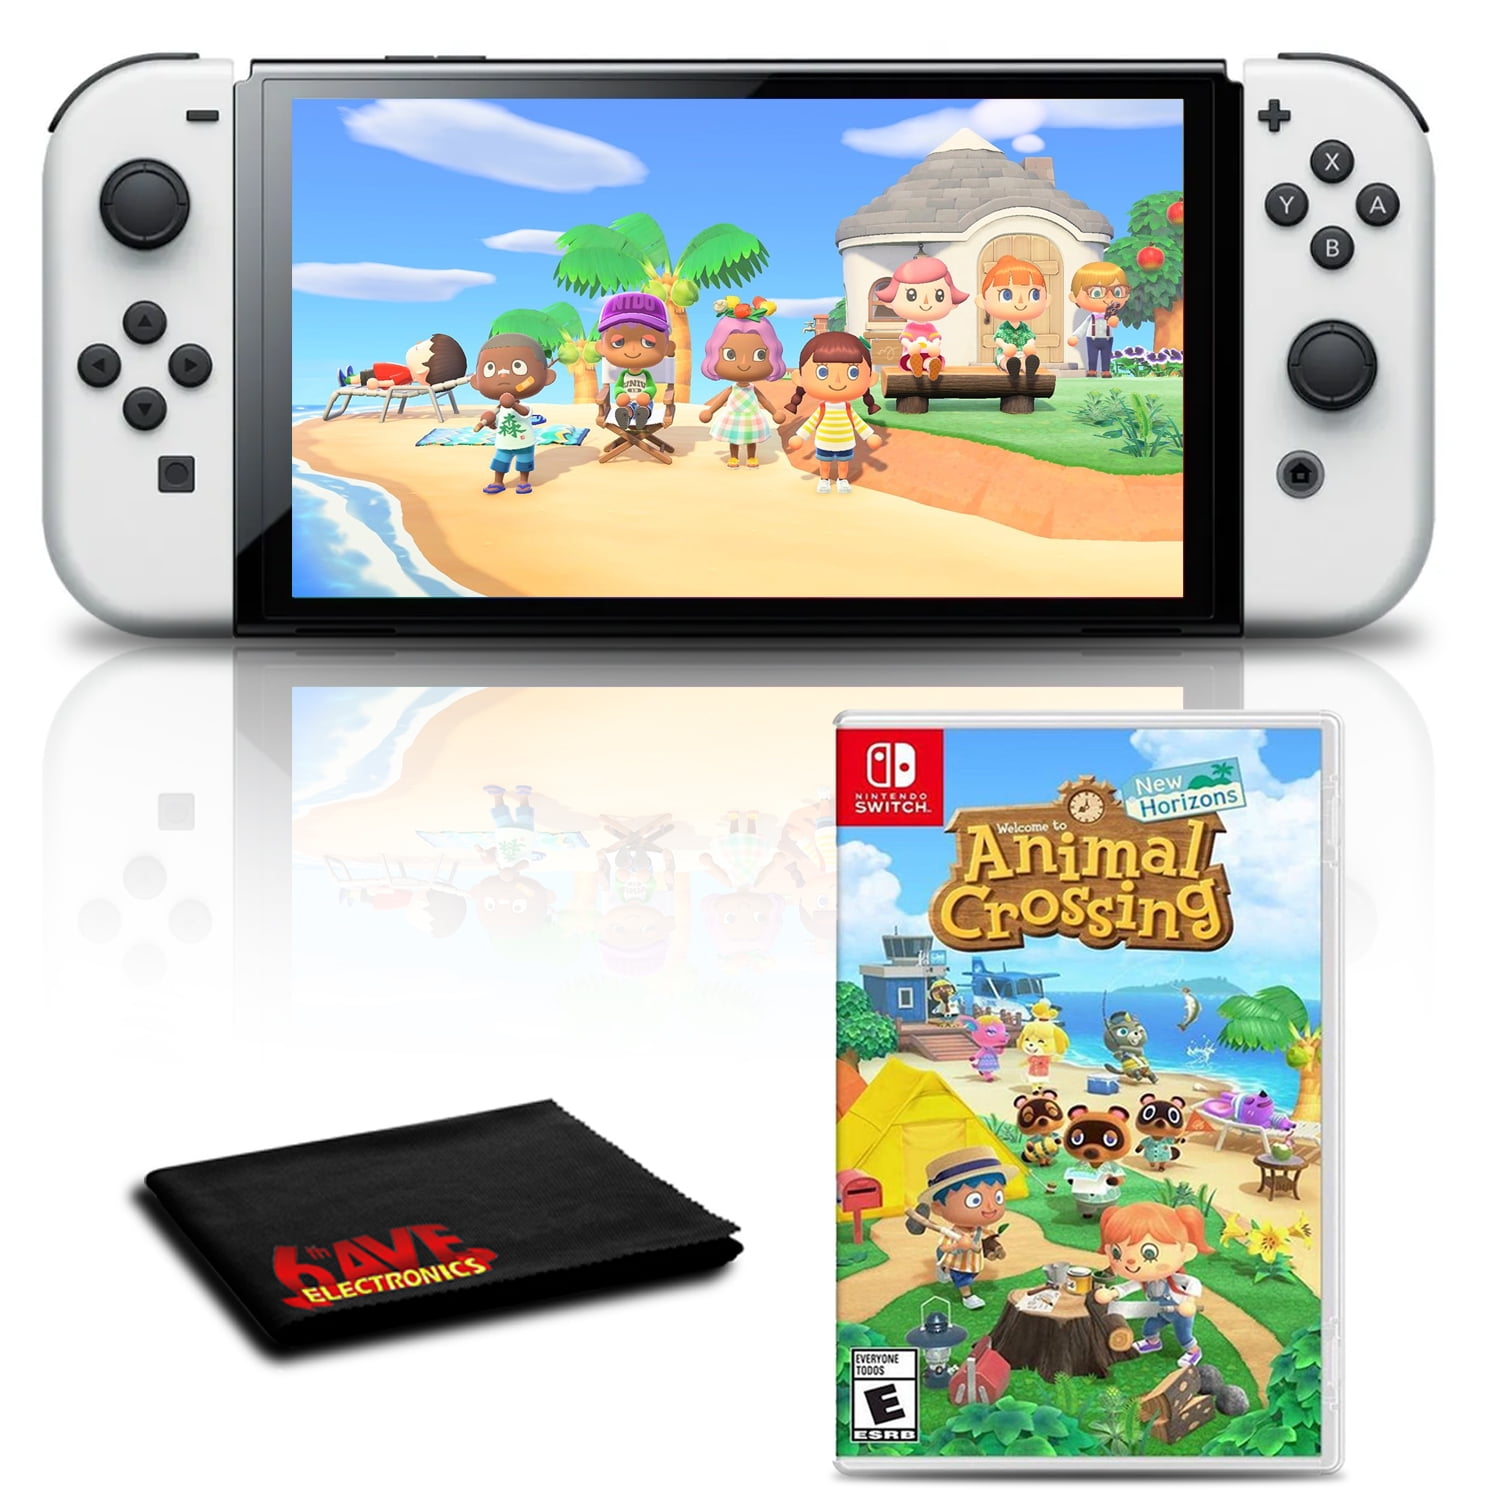 Is the Animal Crossing Switch Oled? 2